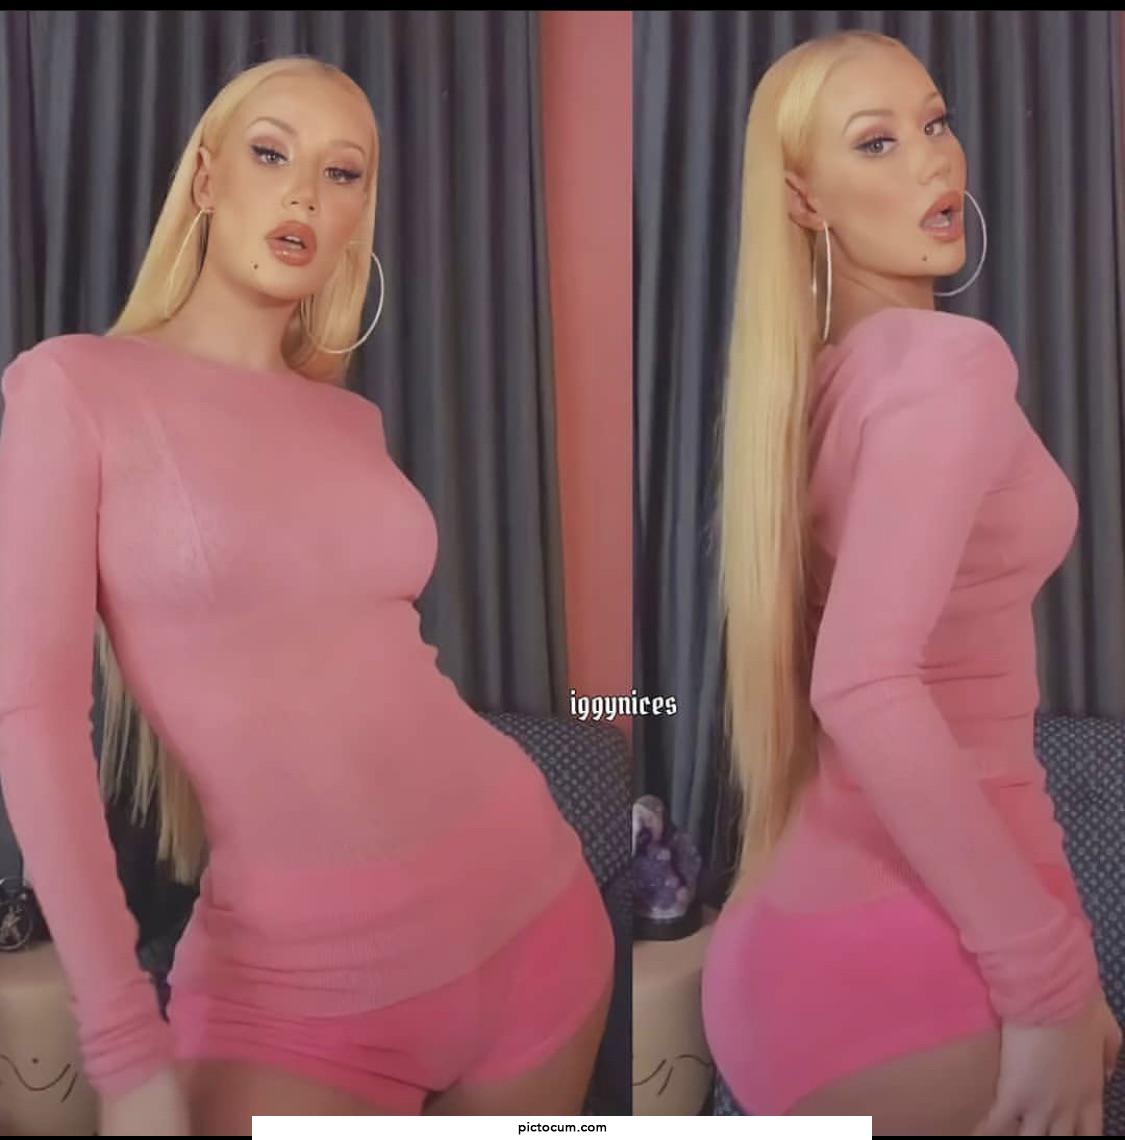 Iggy Azalea was made to take several cocks at once